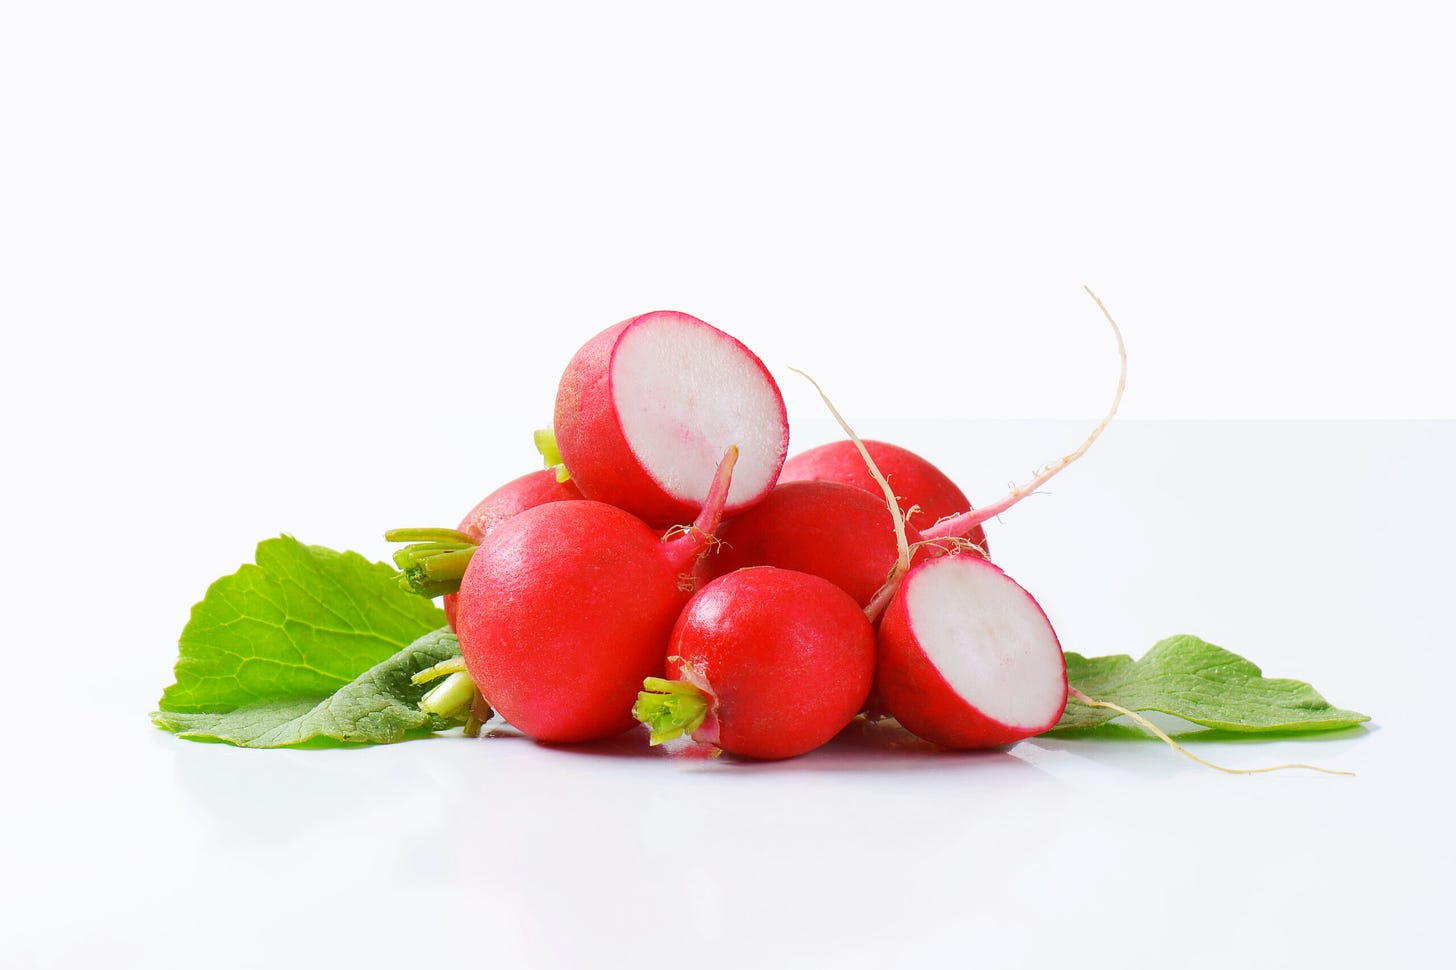 Image of a bunch of red radishes